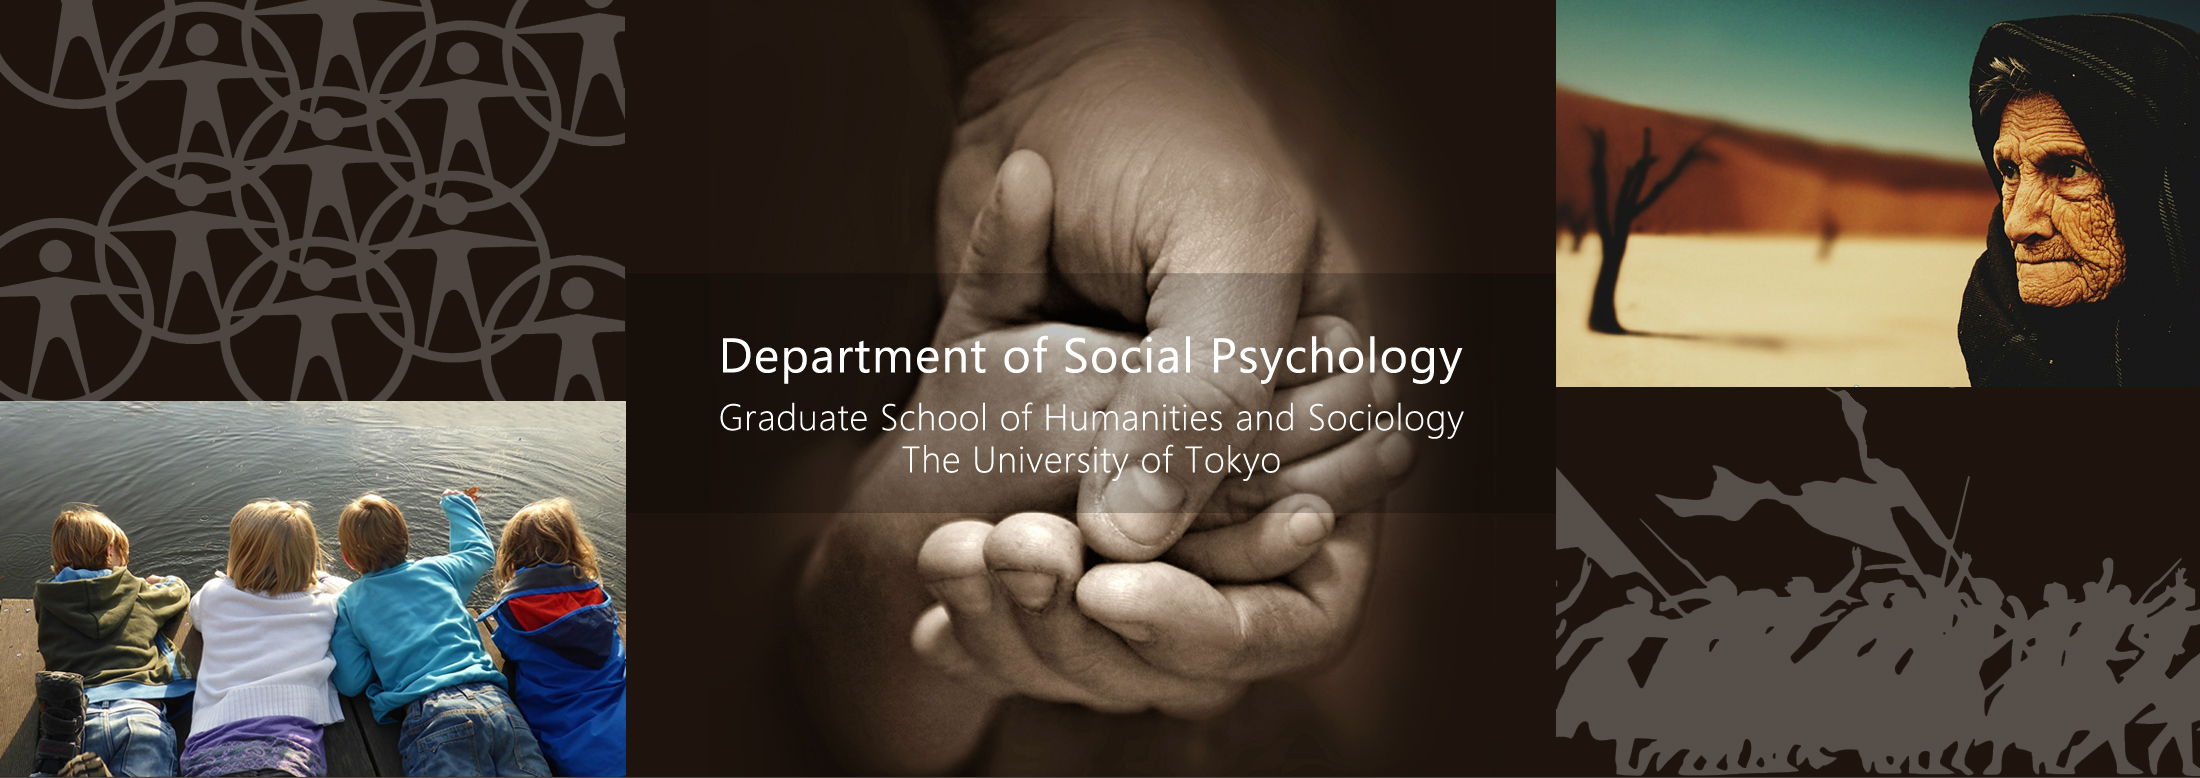 Department of Social Psychology, Graduate School of Humanities and Sociology, The University of Tokyo